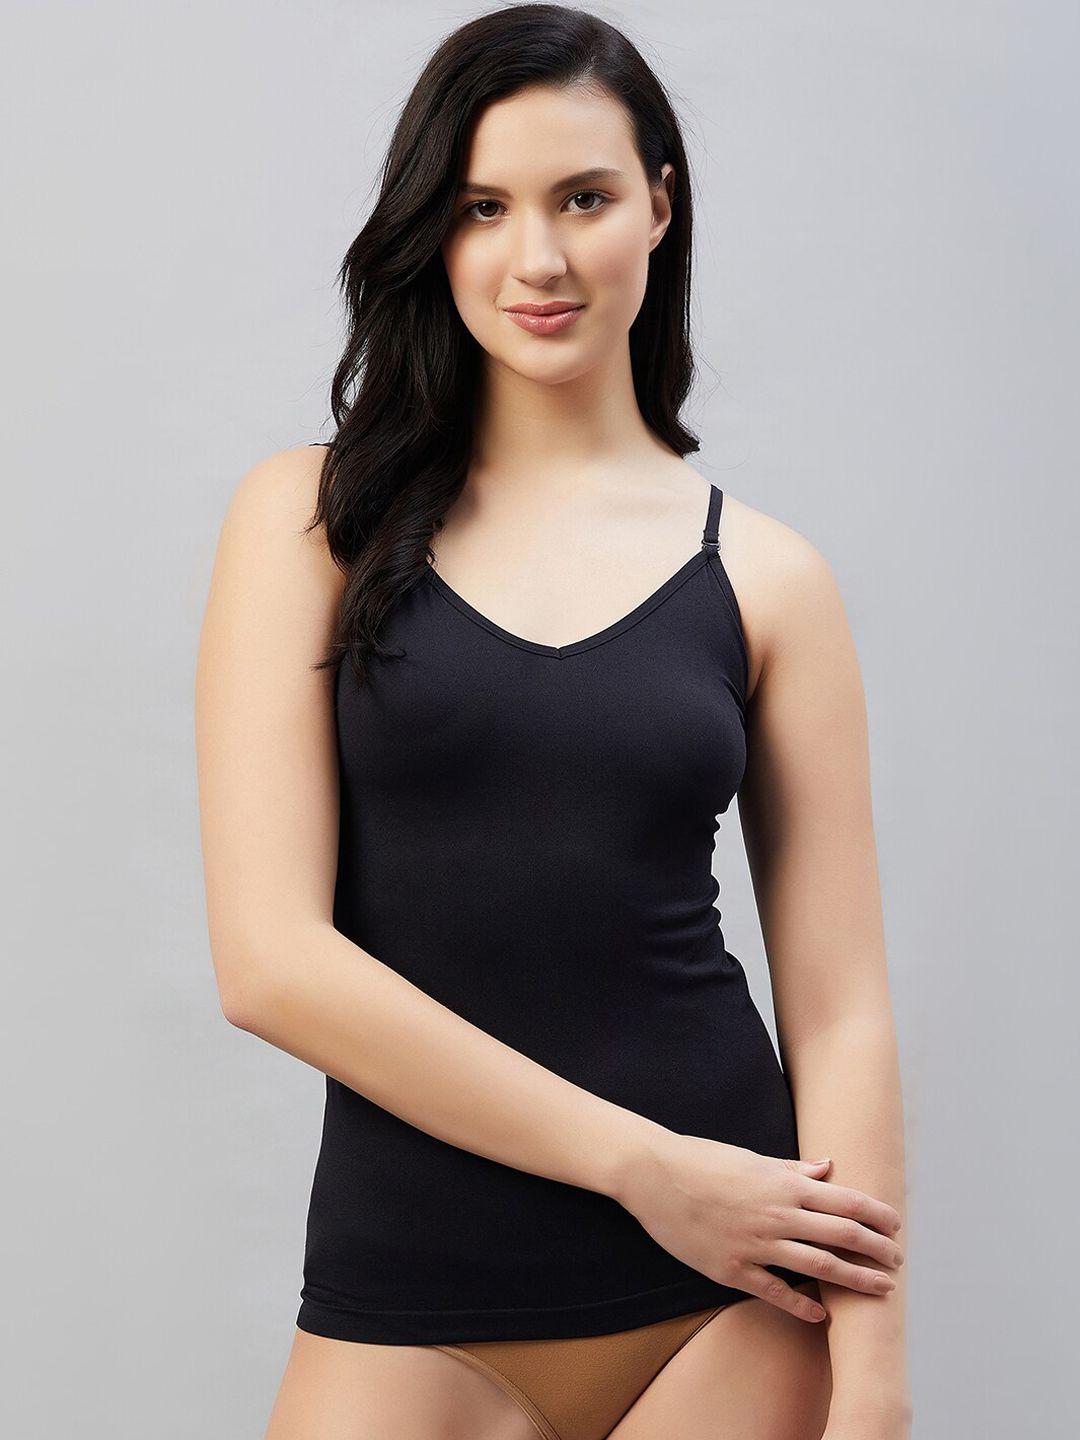 c9-airwear-breathable-seamless-stretchable-camisoles